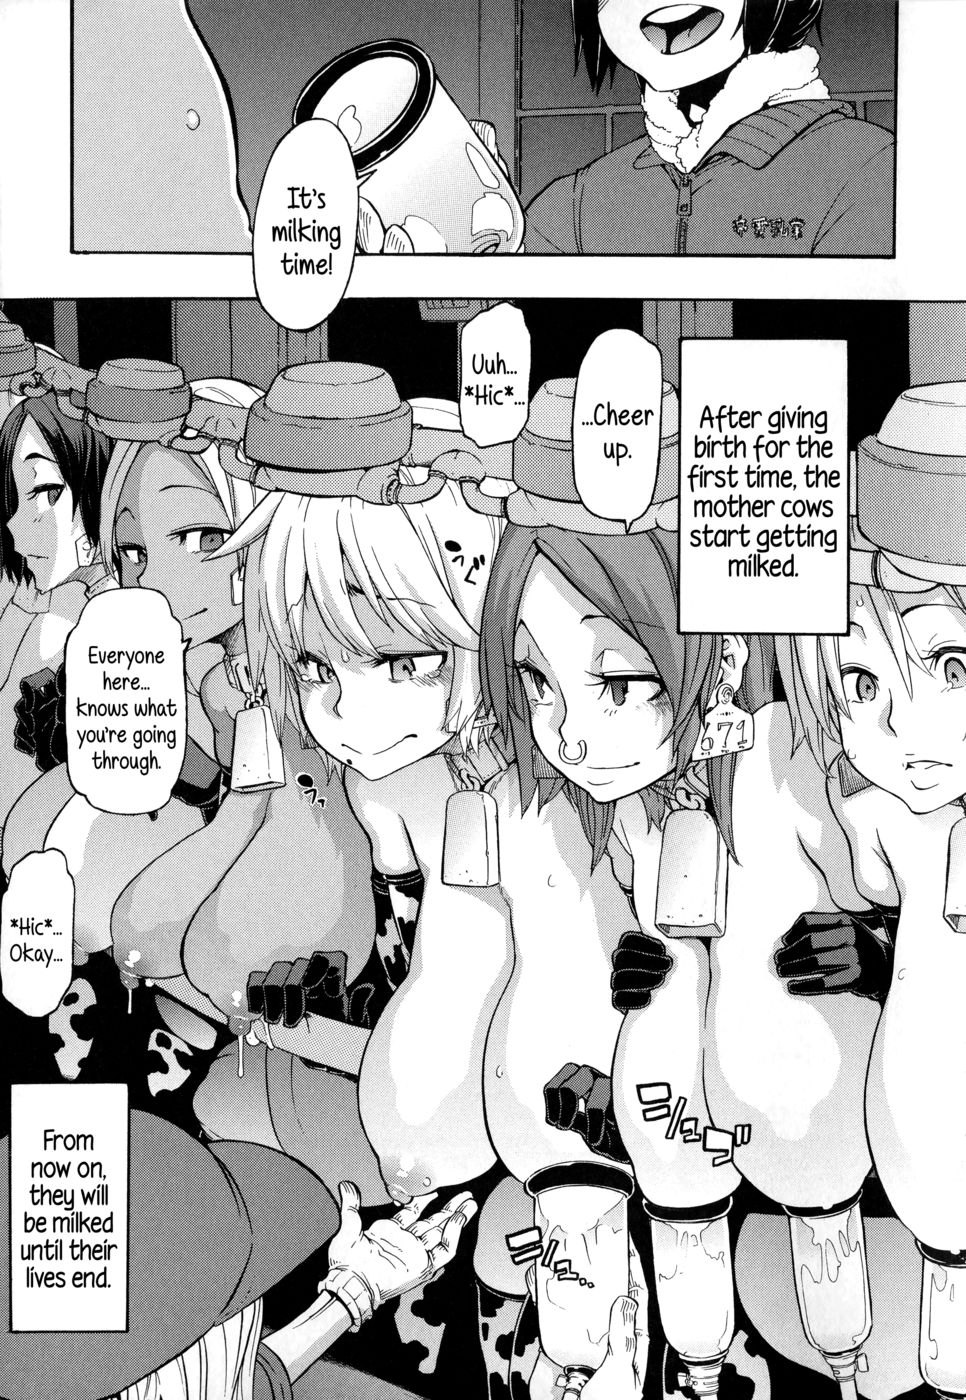 A dairy cows life-Read-Hentai Manga Hentai Comic picture picture